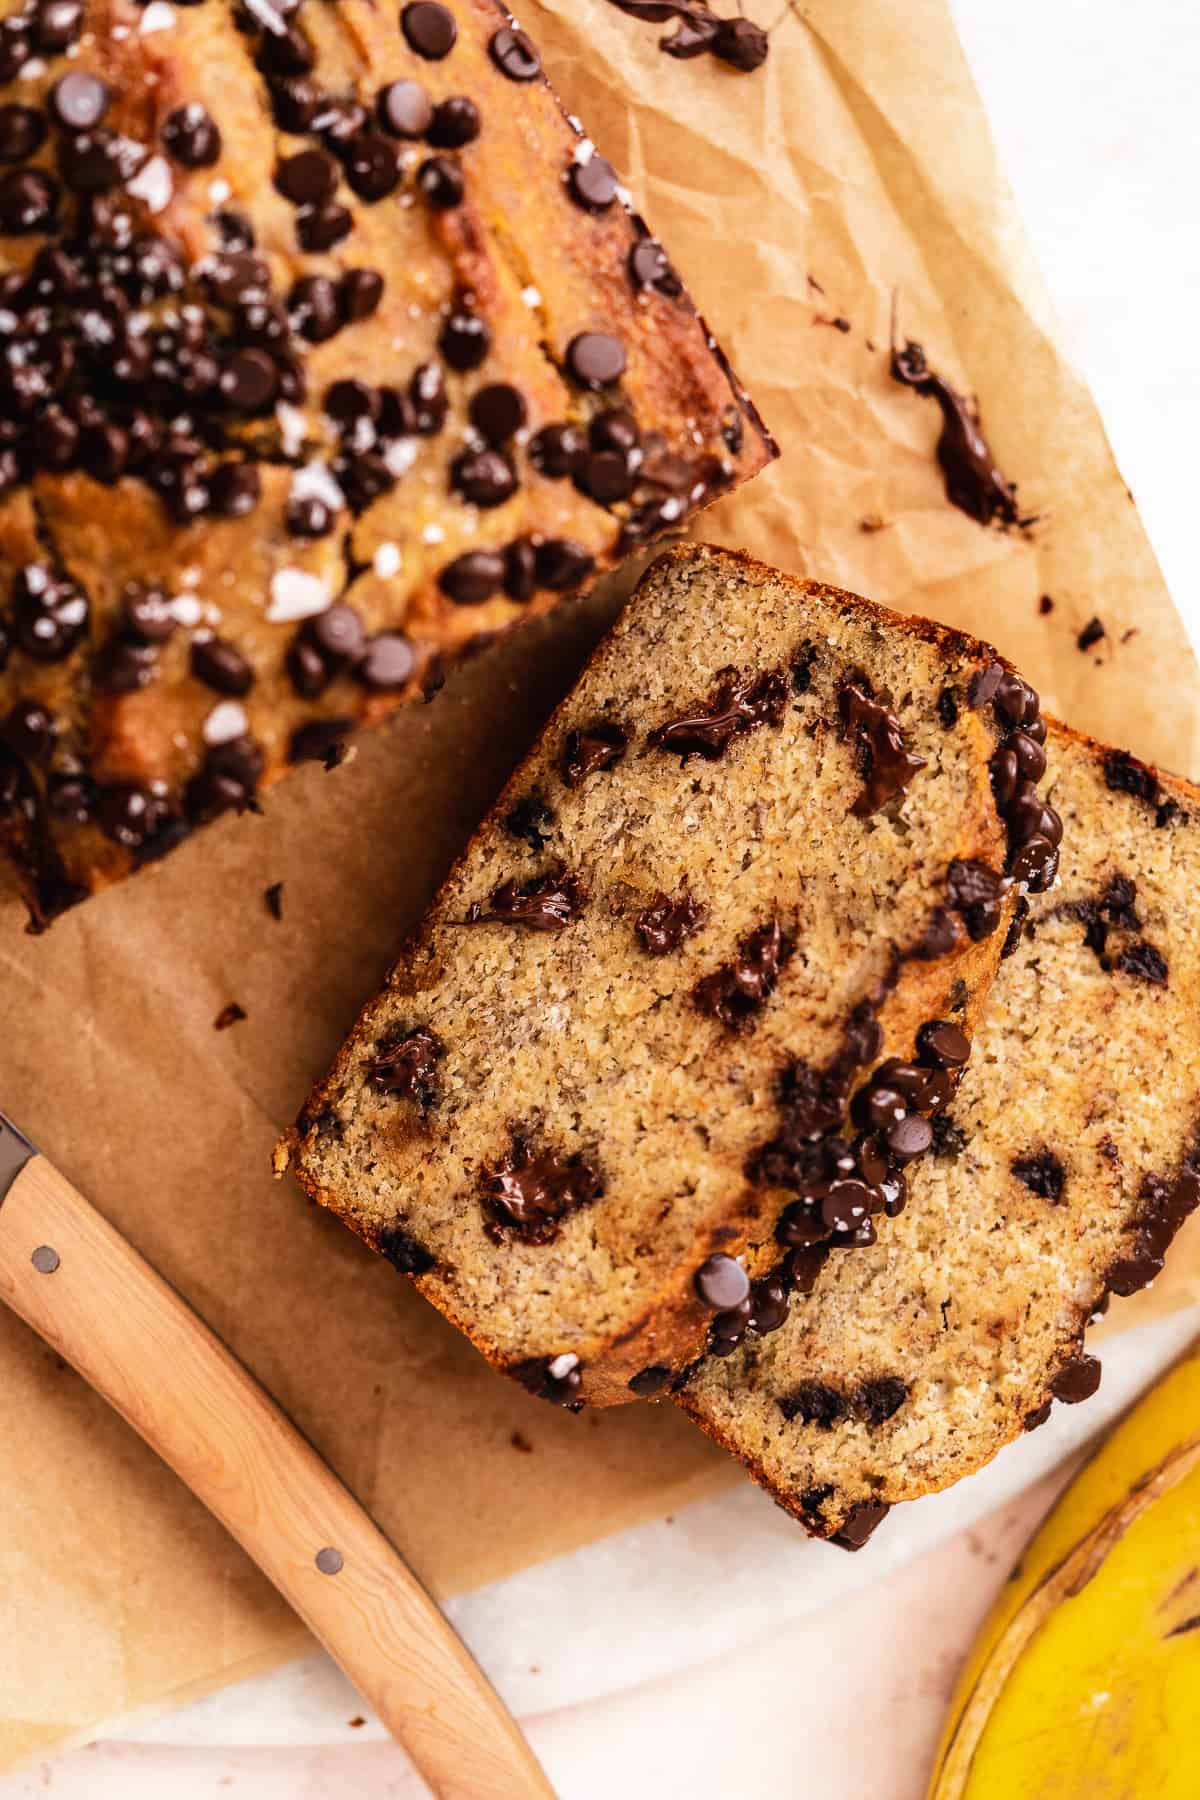 Slices of chocolate chip bread laying on top of one another on brown paper.